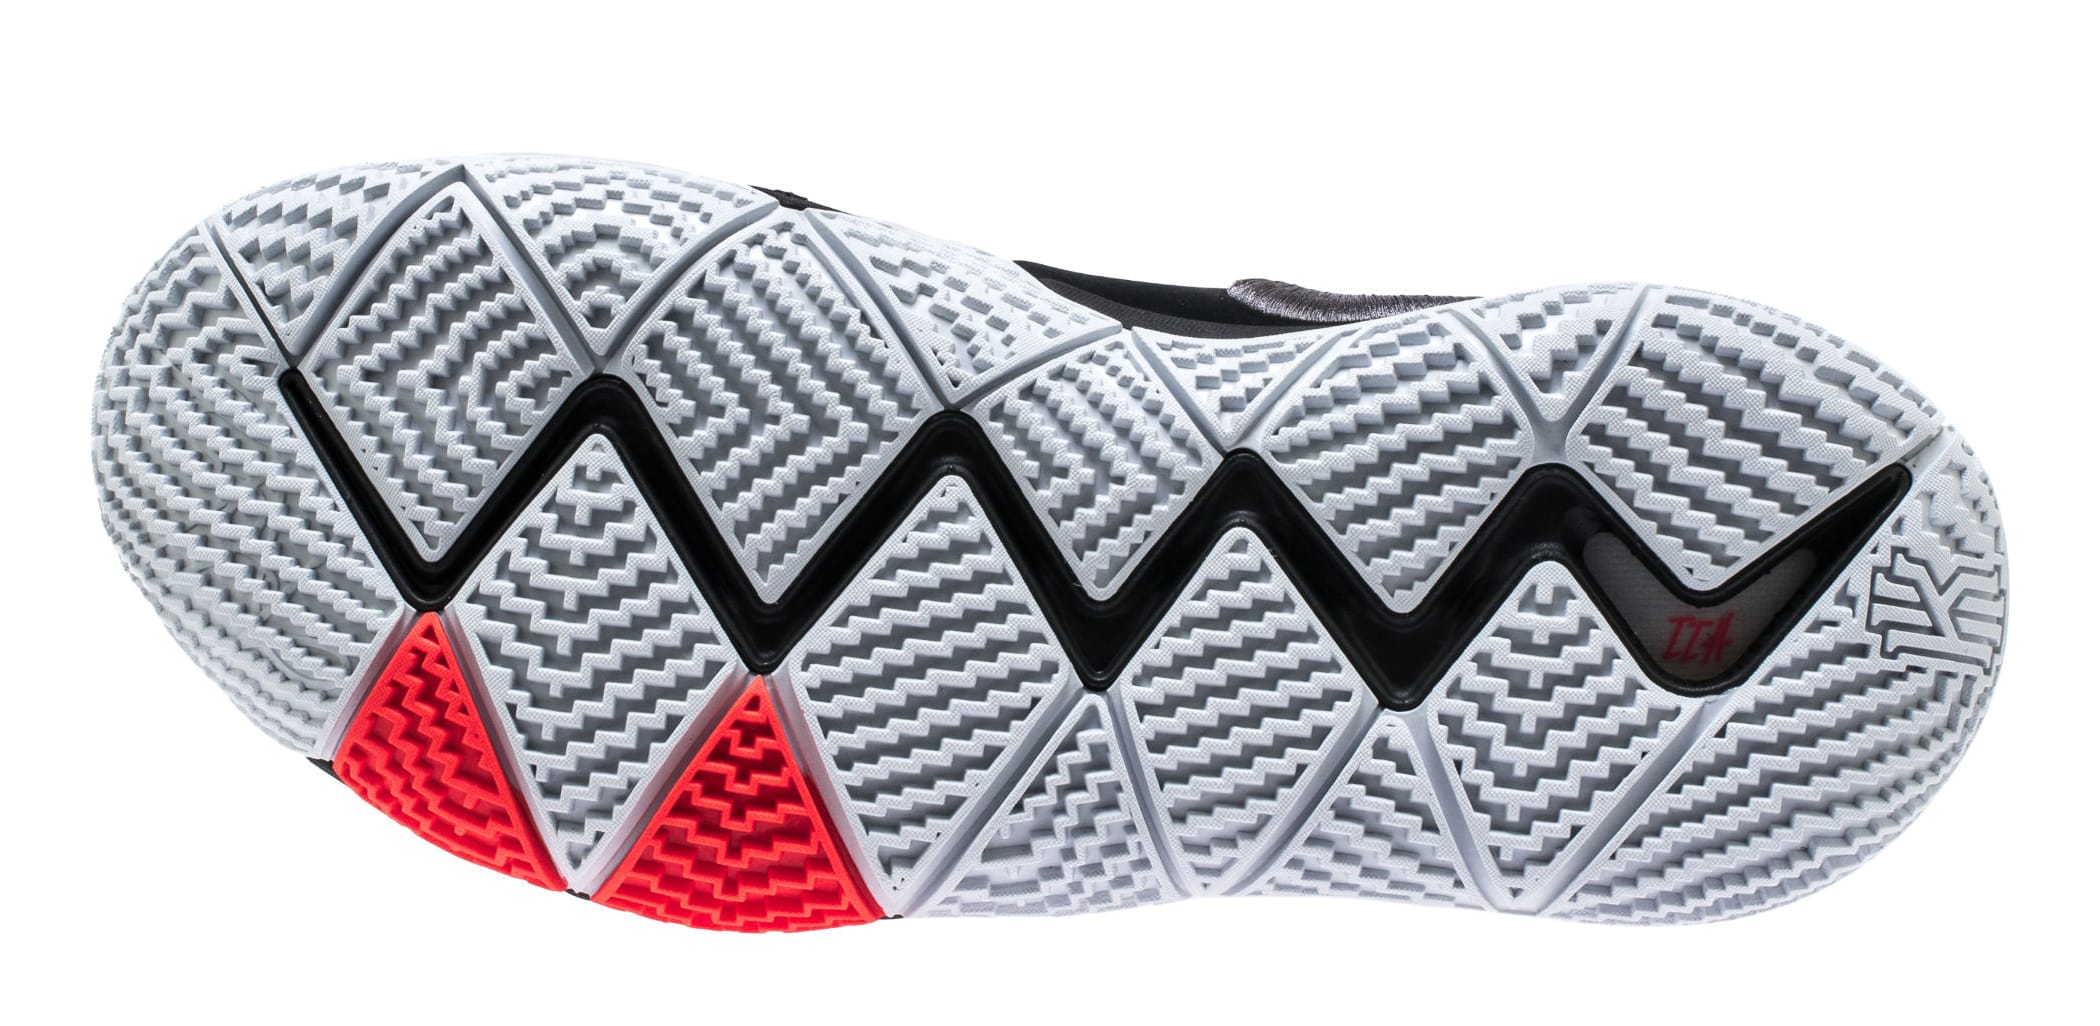 Nike Kyrie 4 &#x27;41 for Ages&#x27; (Sole)